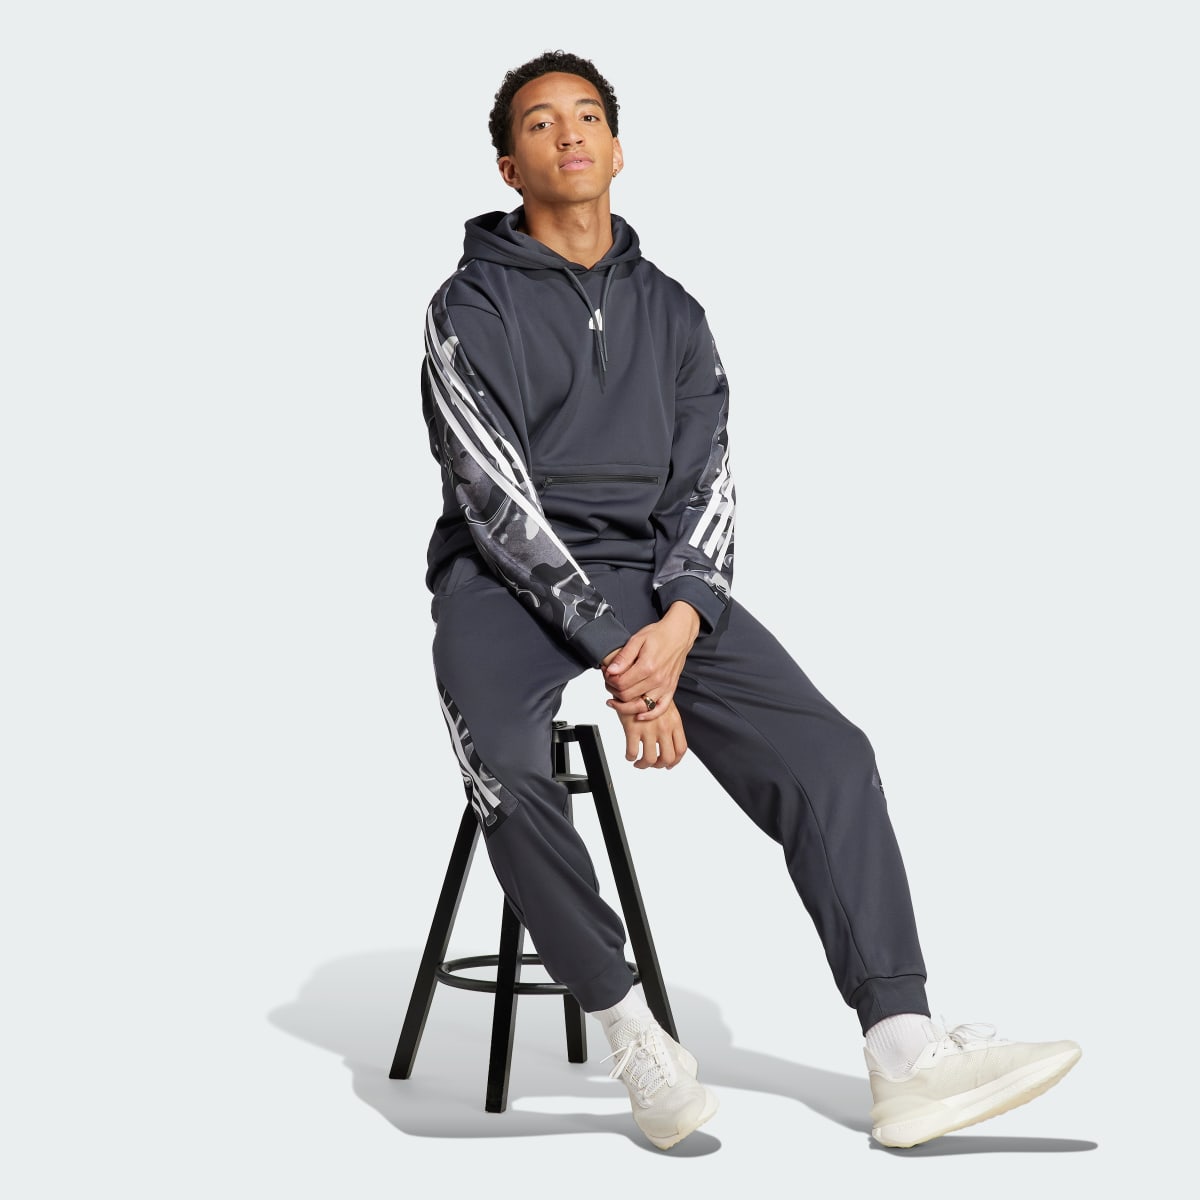 Adidas Future Icons Allover Print Hoodie. 4